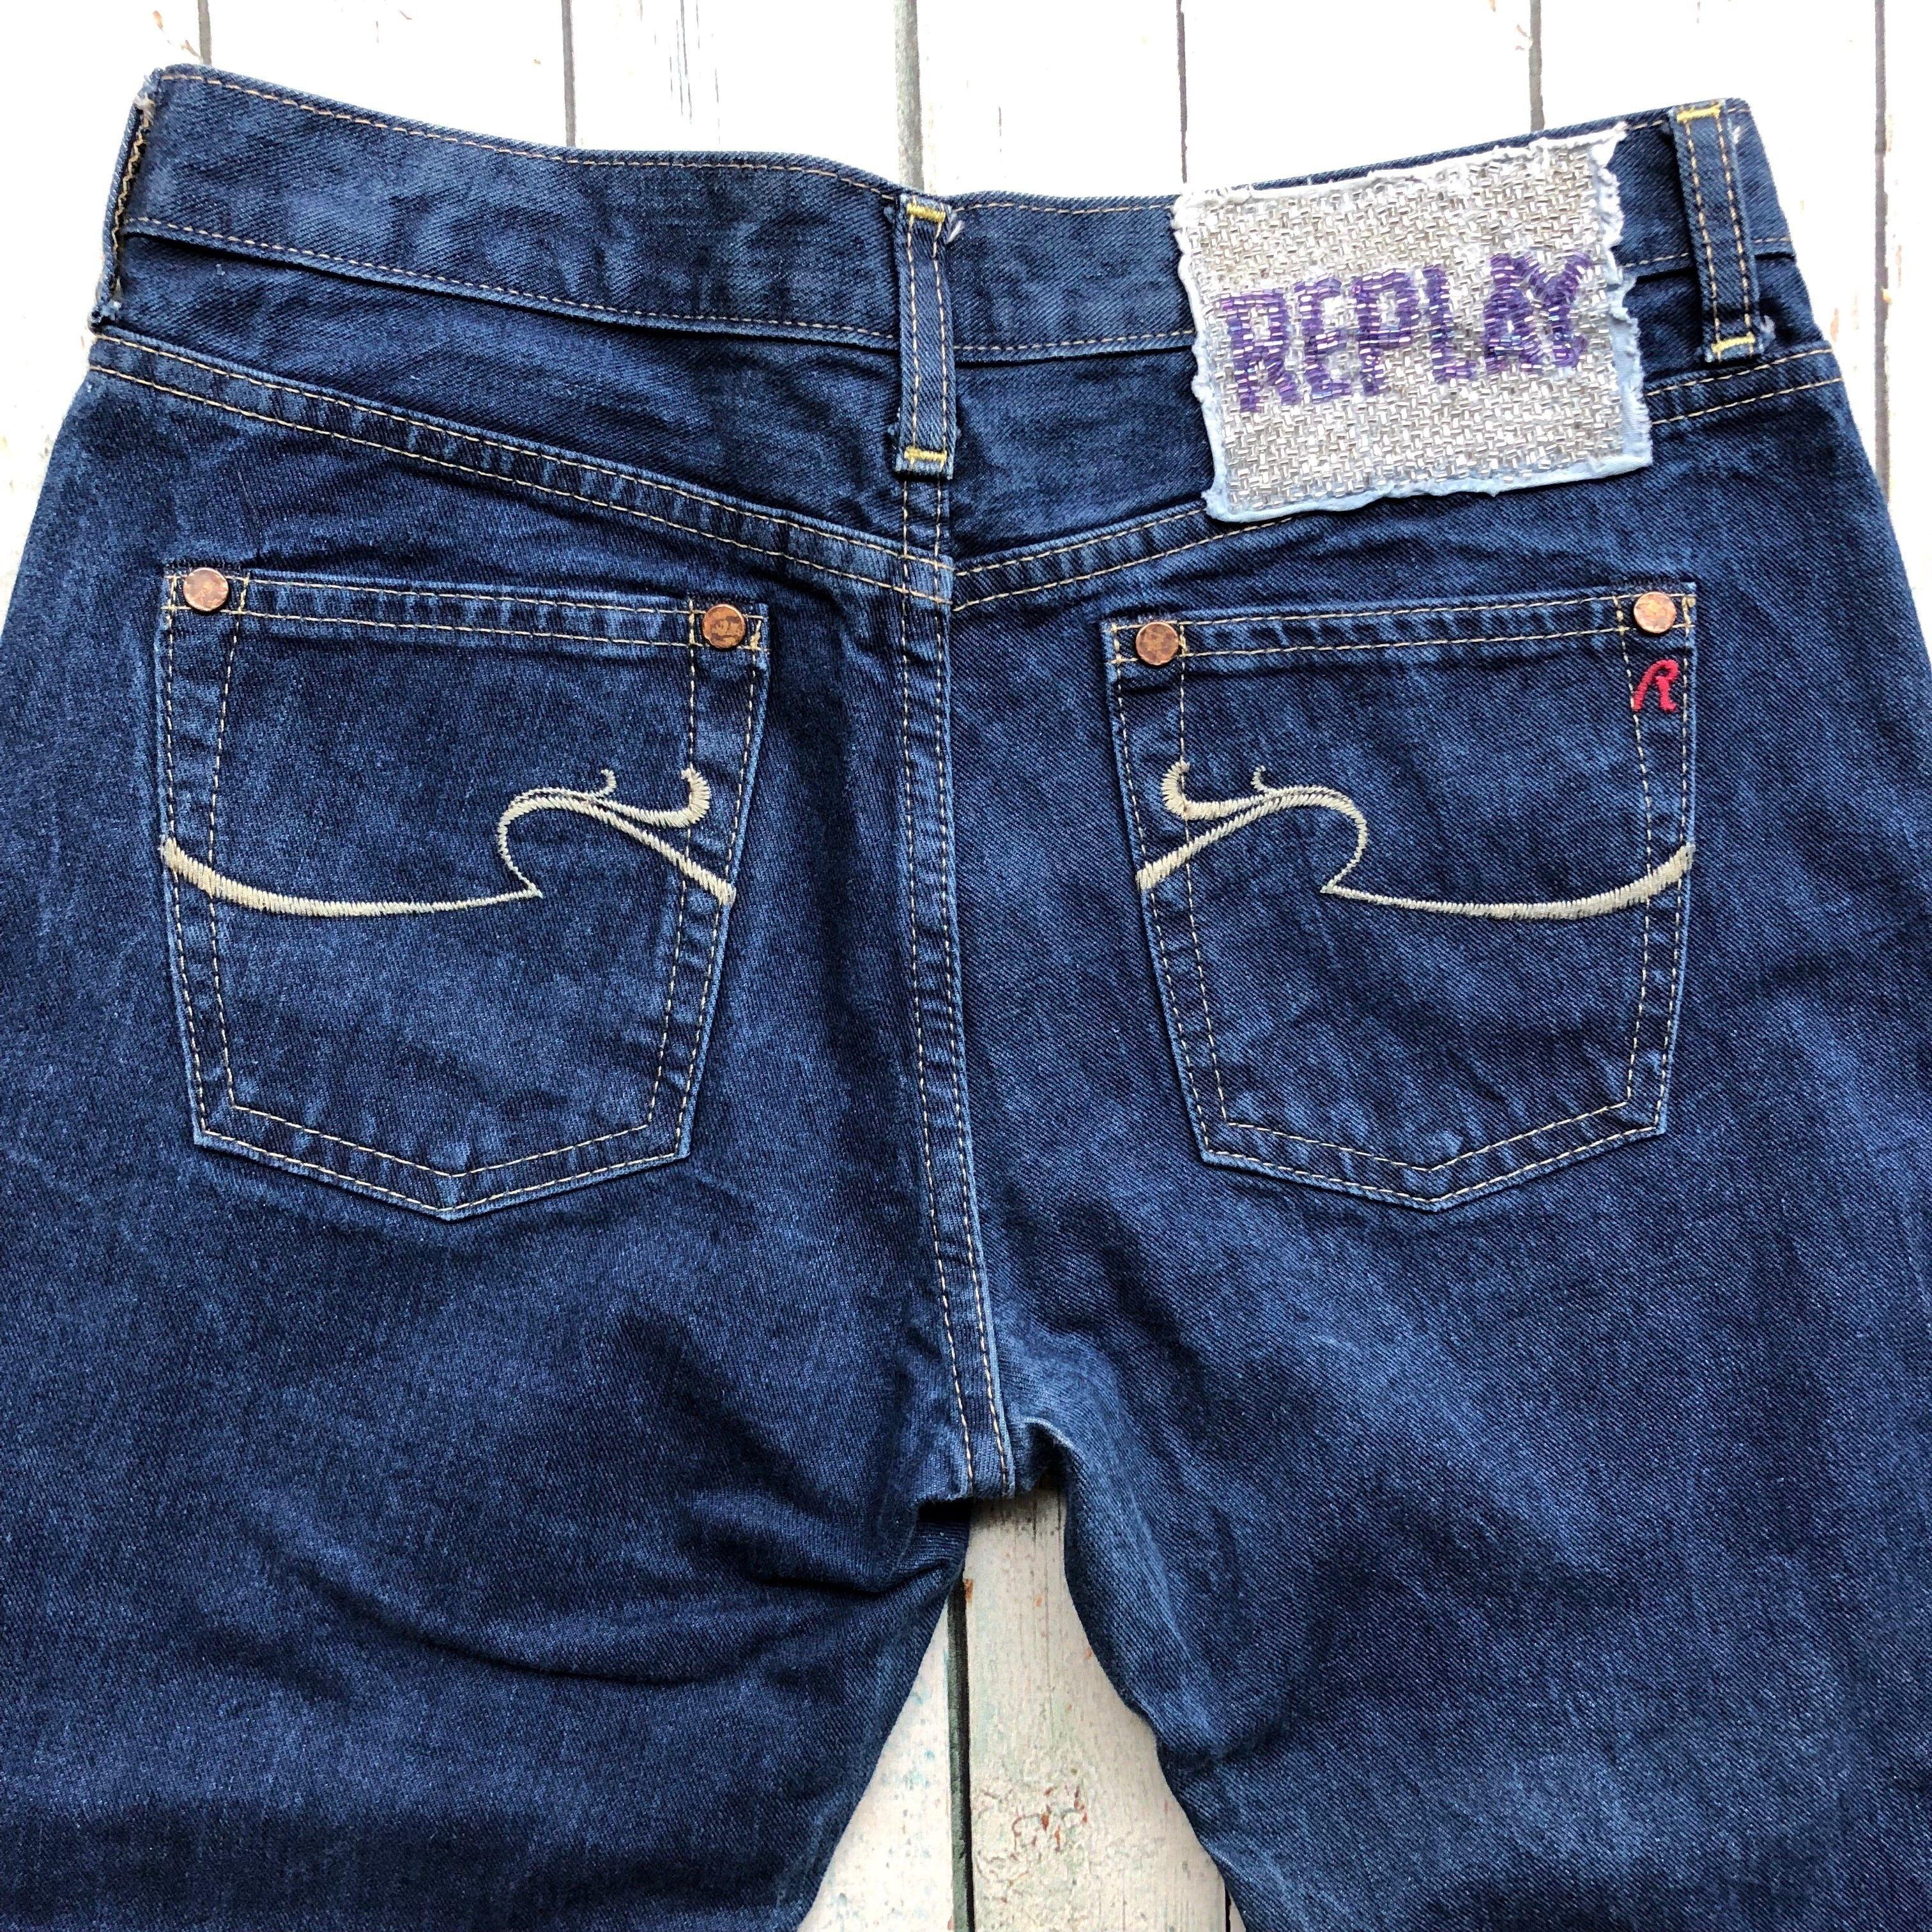 replay jeans sale